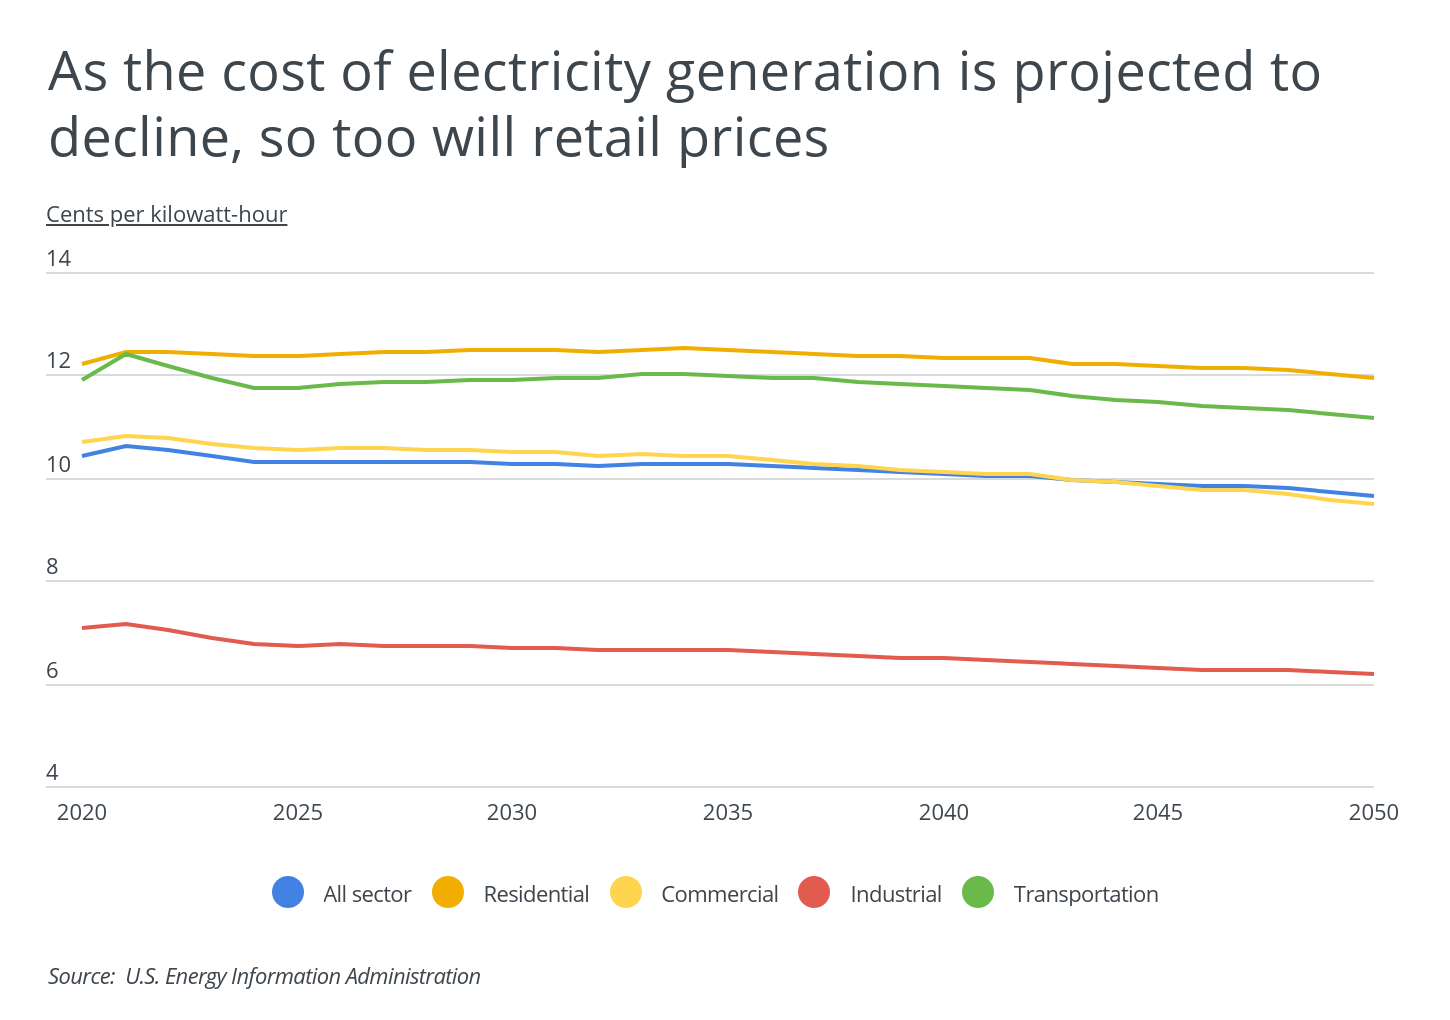 As the cost of electricity generation is projected to decline, so too will retail prices